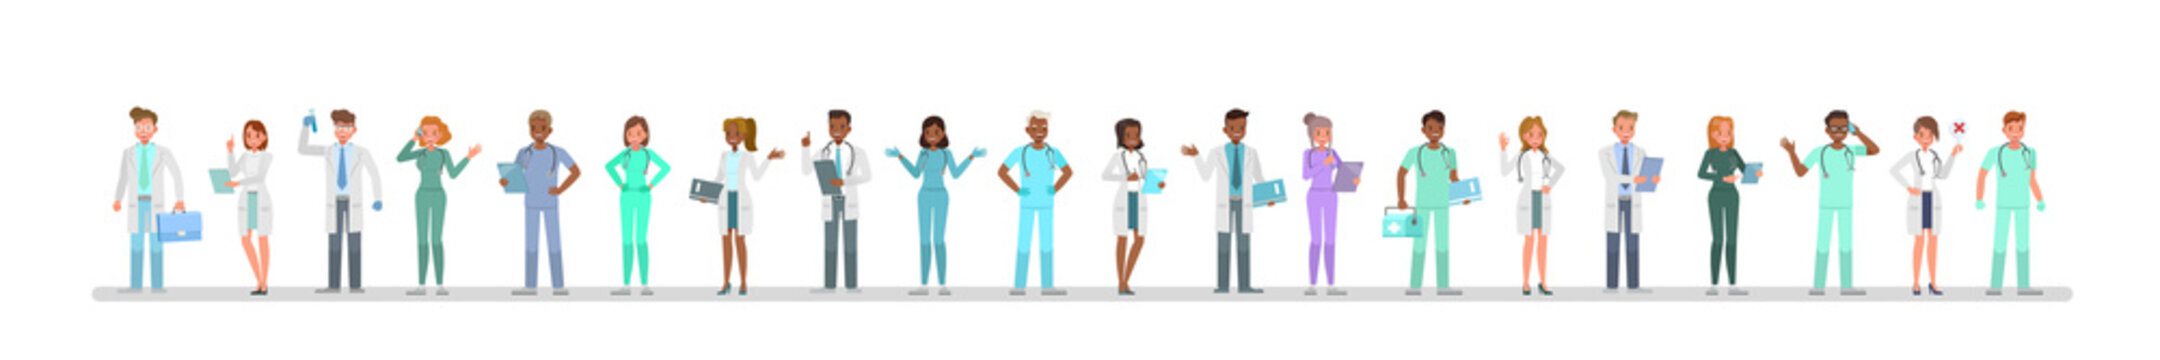 Group of doctors different poses character vector design. Presentation in various action with emotions.